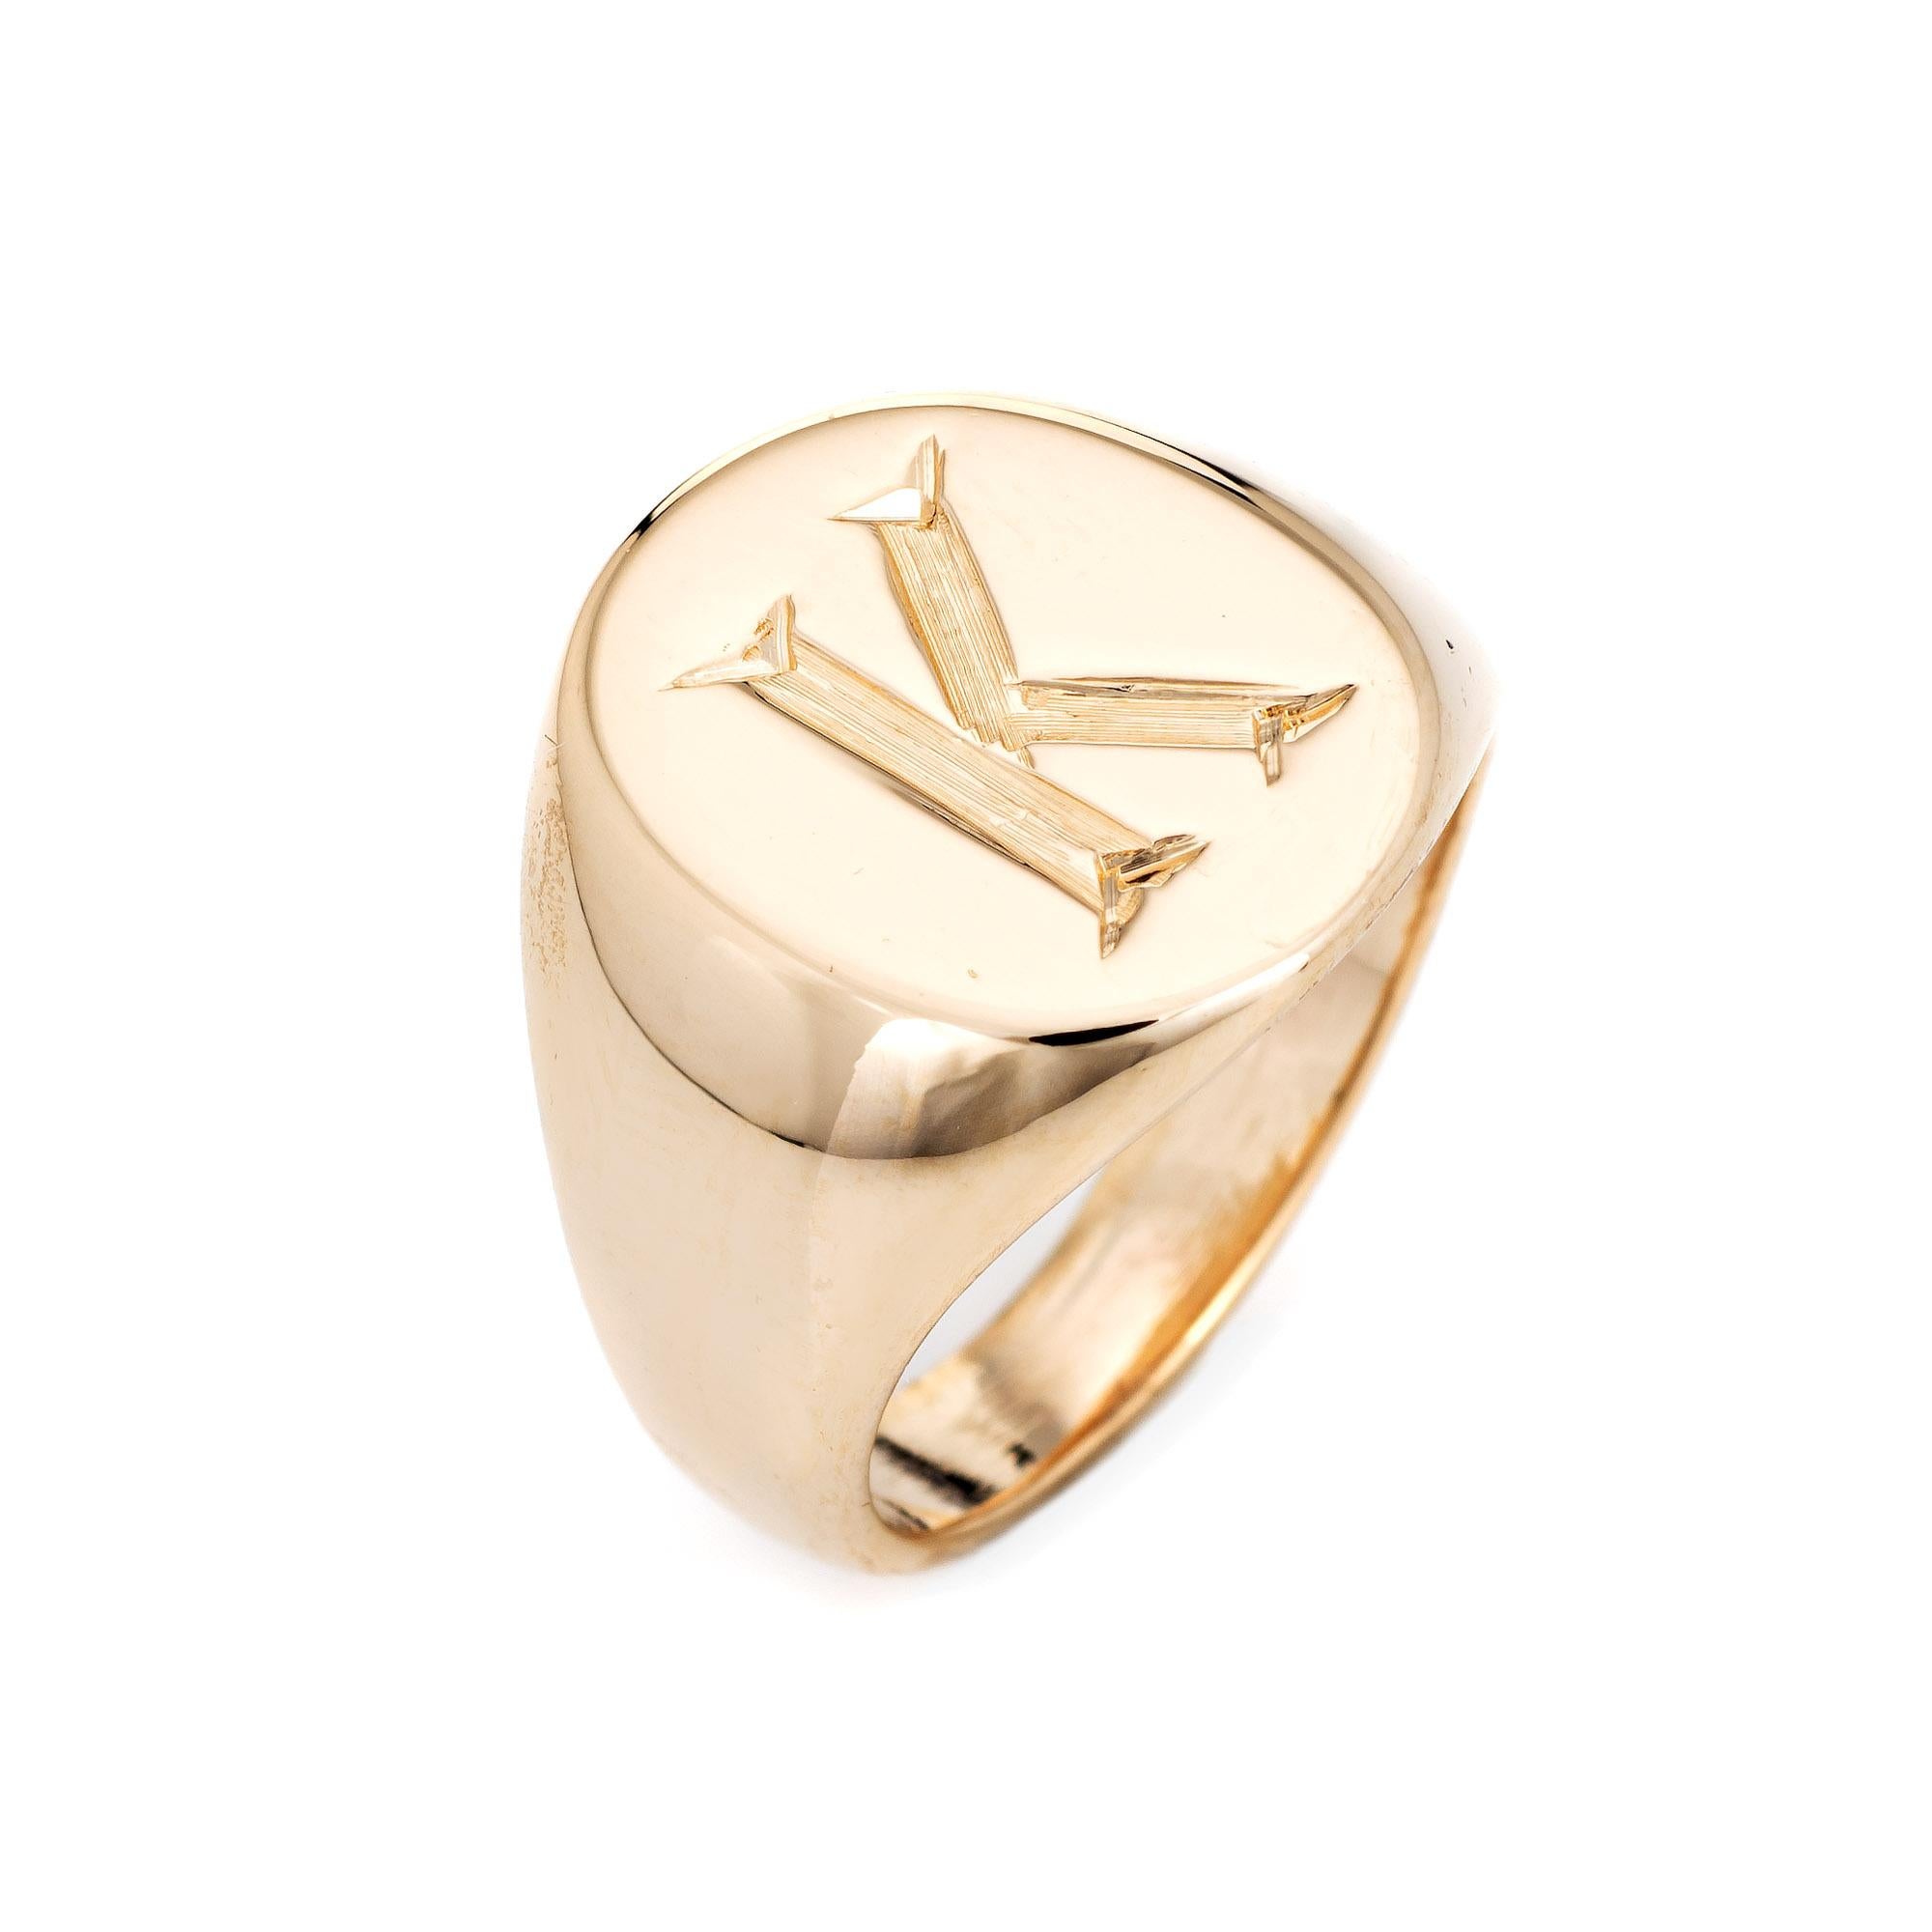 Finely detailed vintage Tiffany & Co signet ring crafted in 14k yellow gold. 

The oval signet mount is engraved with the letter 'K' (can be removed if desired). The signet ring is small in size and great worn on the pinky finger. The underside of